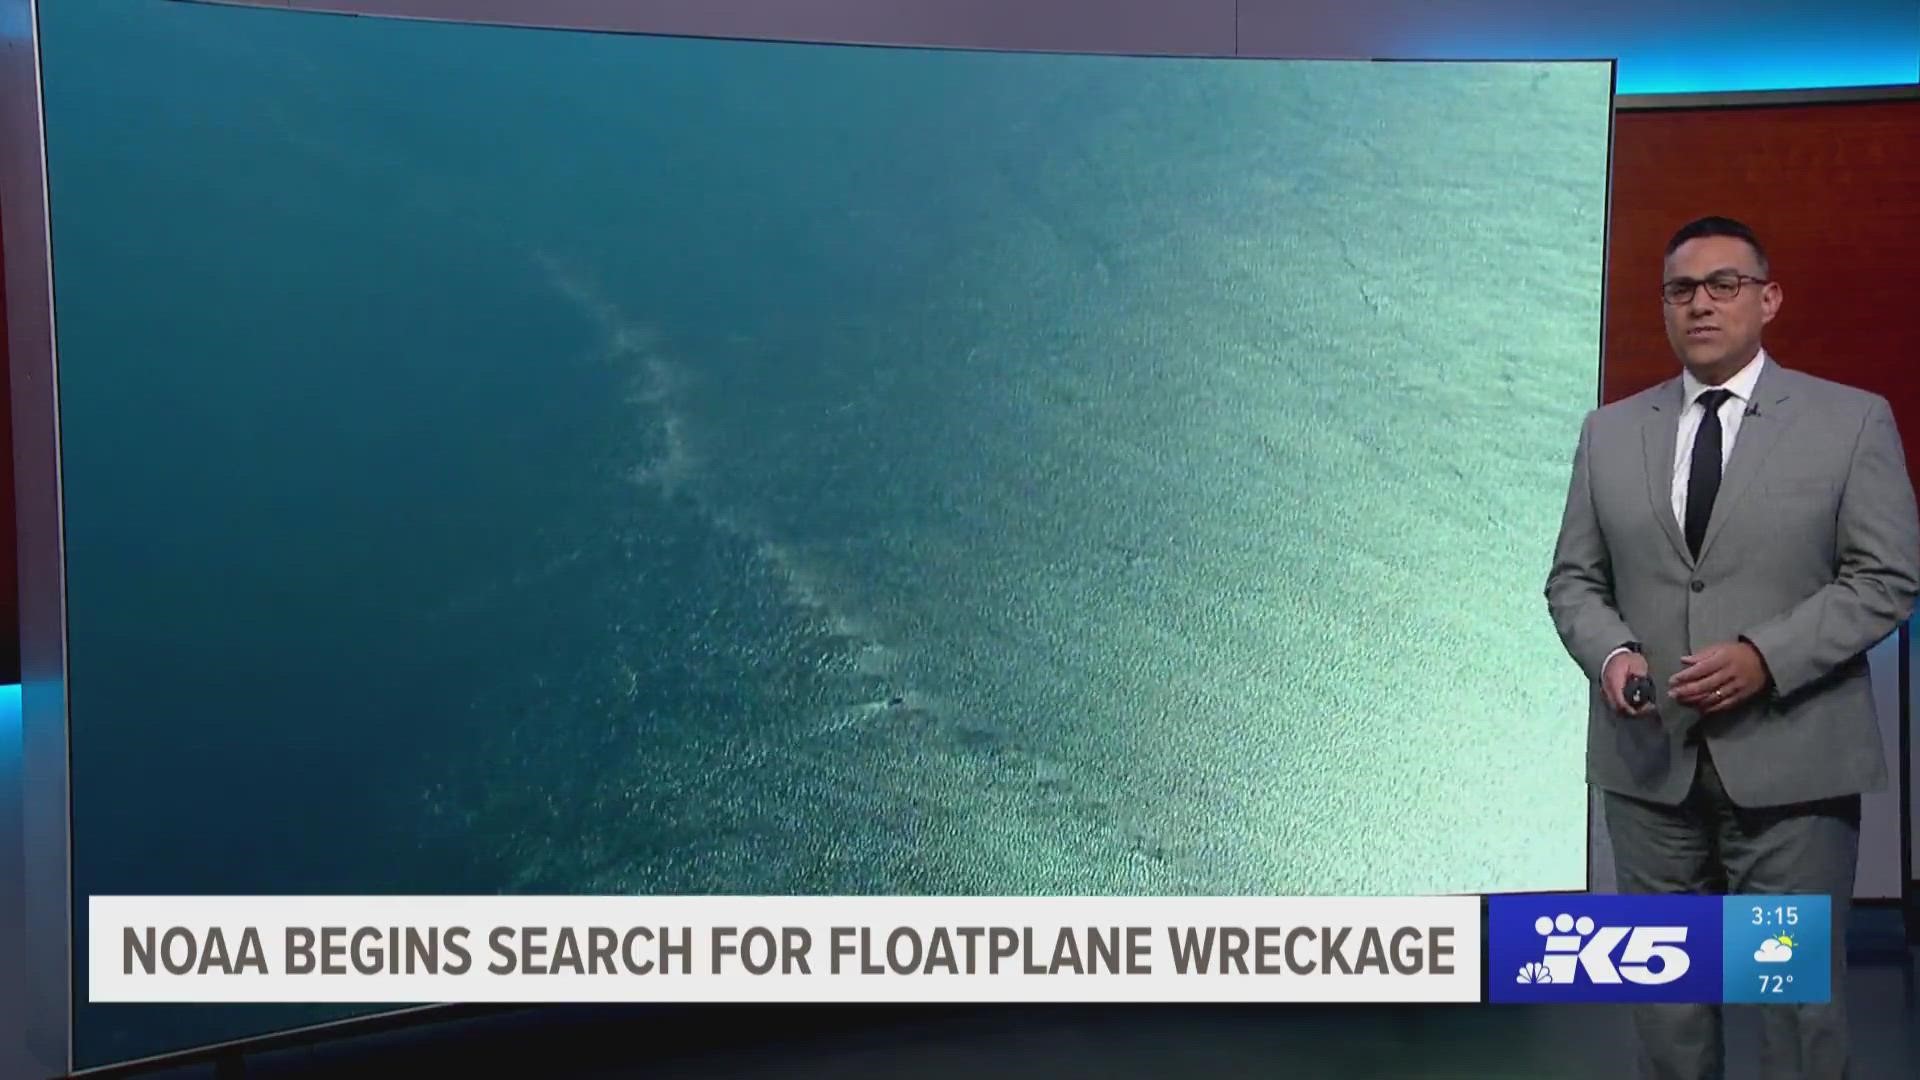 The National Oceanic and Atmospheric Administration began its search for the floatplane wreckage near Whidbey Island.